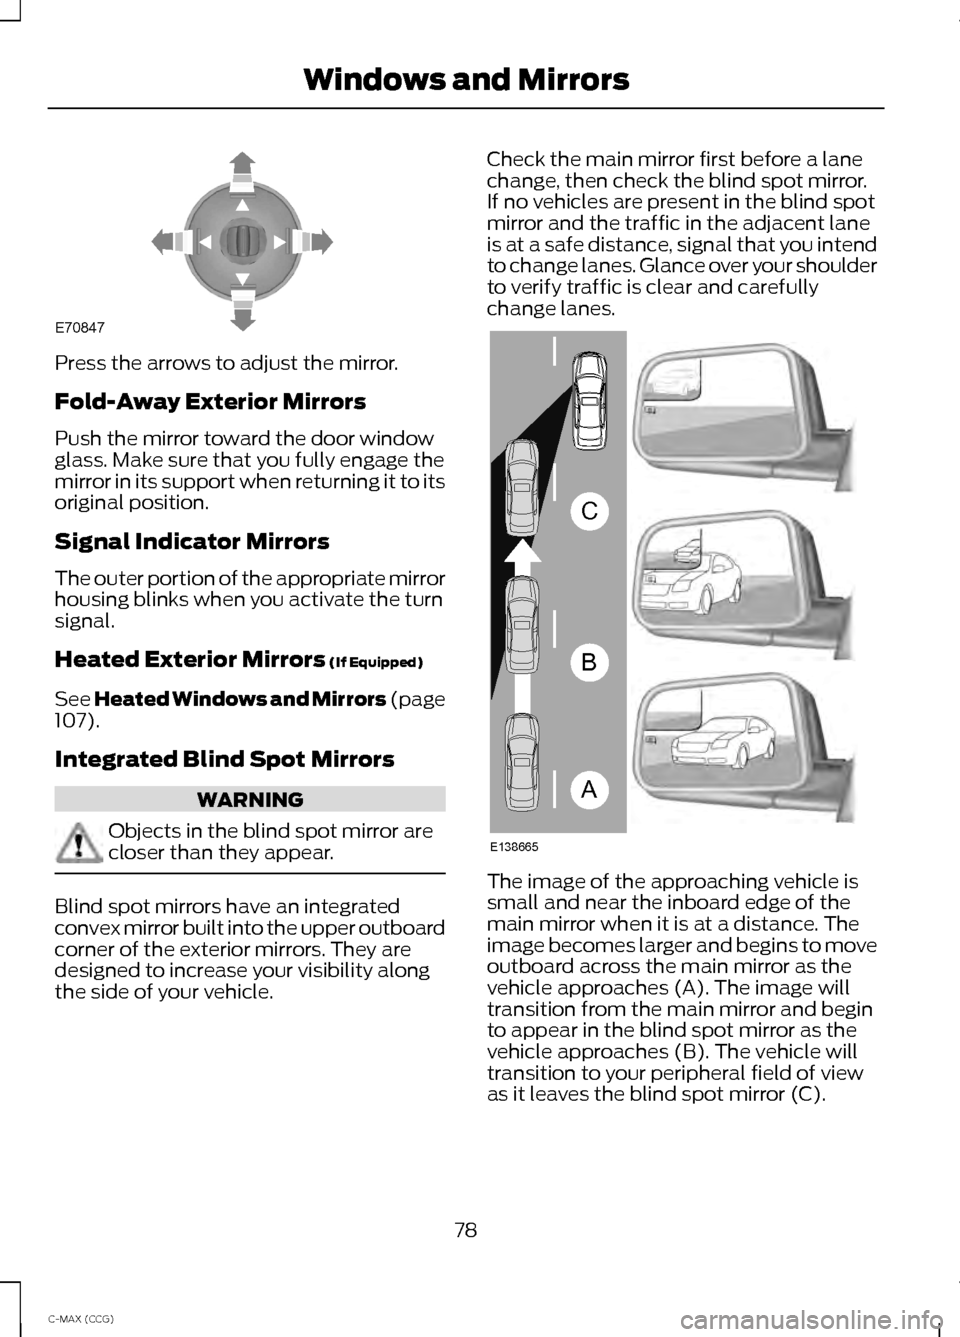 FORD C MAX HYBRID 2014 2.G Manual PDF Press the arrows to adjust the mirror.
Fold-Away Exterior Mirrors
Push the mirror toward the door window
glass. Make sure that you fully engage the
mirror in its support when returning it to its
origi